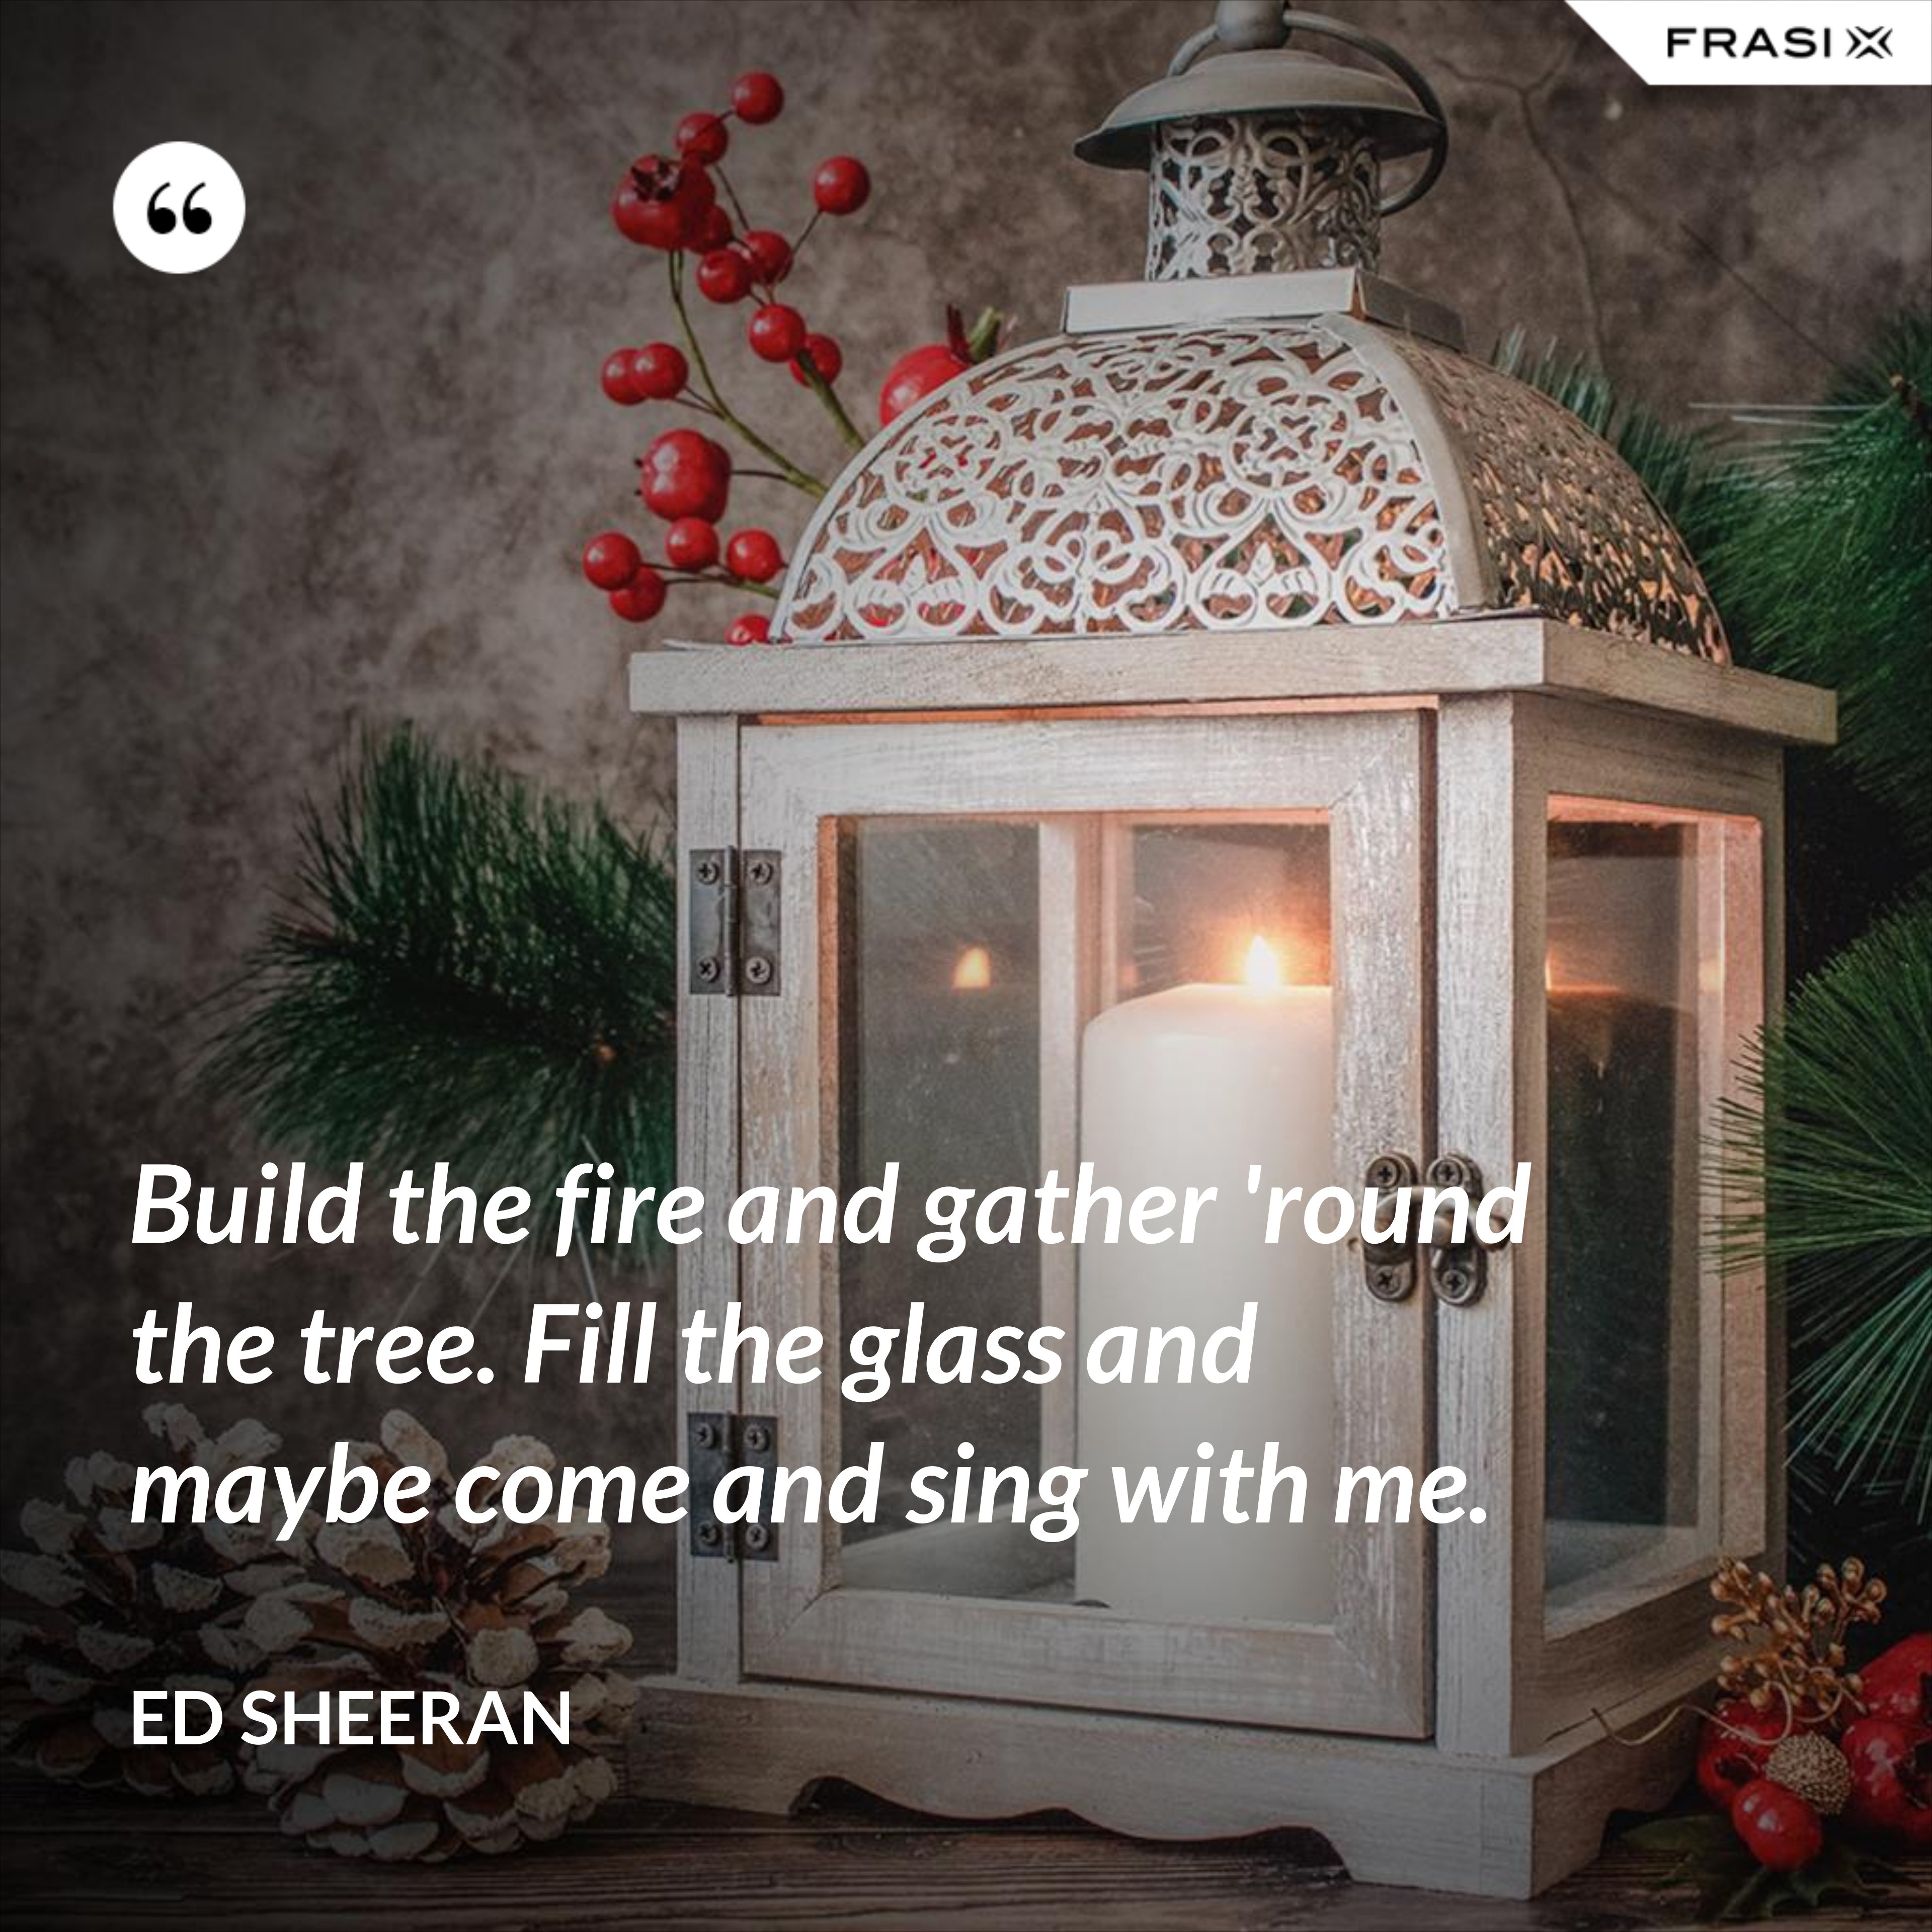 Build the fire and gather 'round the tree. Fill the glass and maybe come and sing with me. - Ed Sheeran